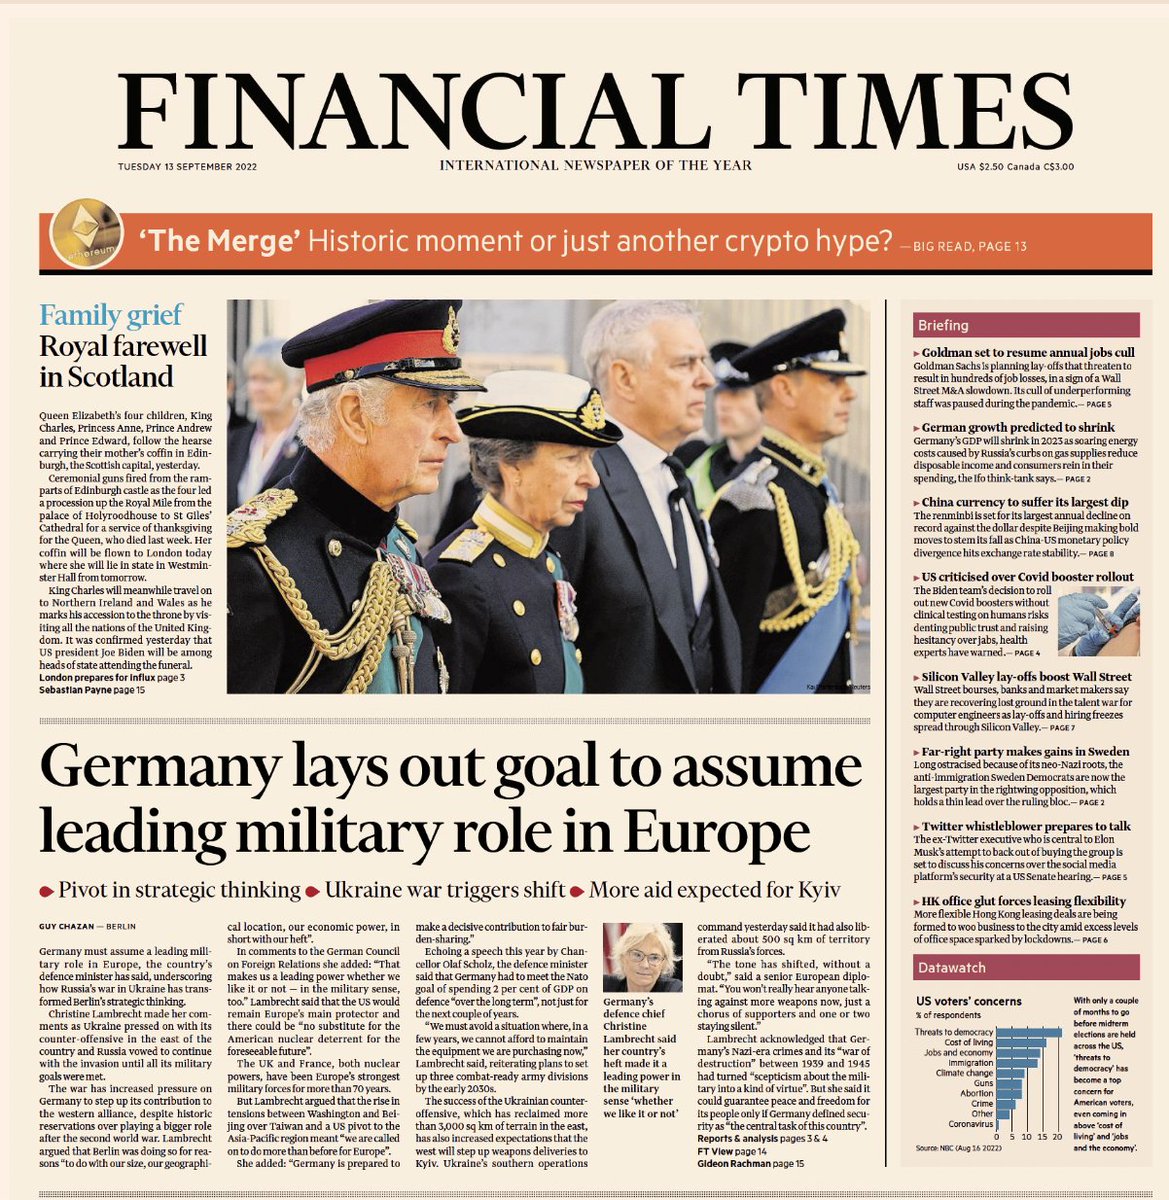 Front page of the Financial Times: The Merge